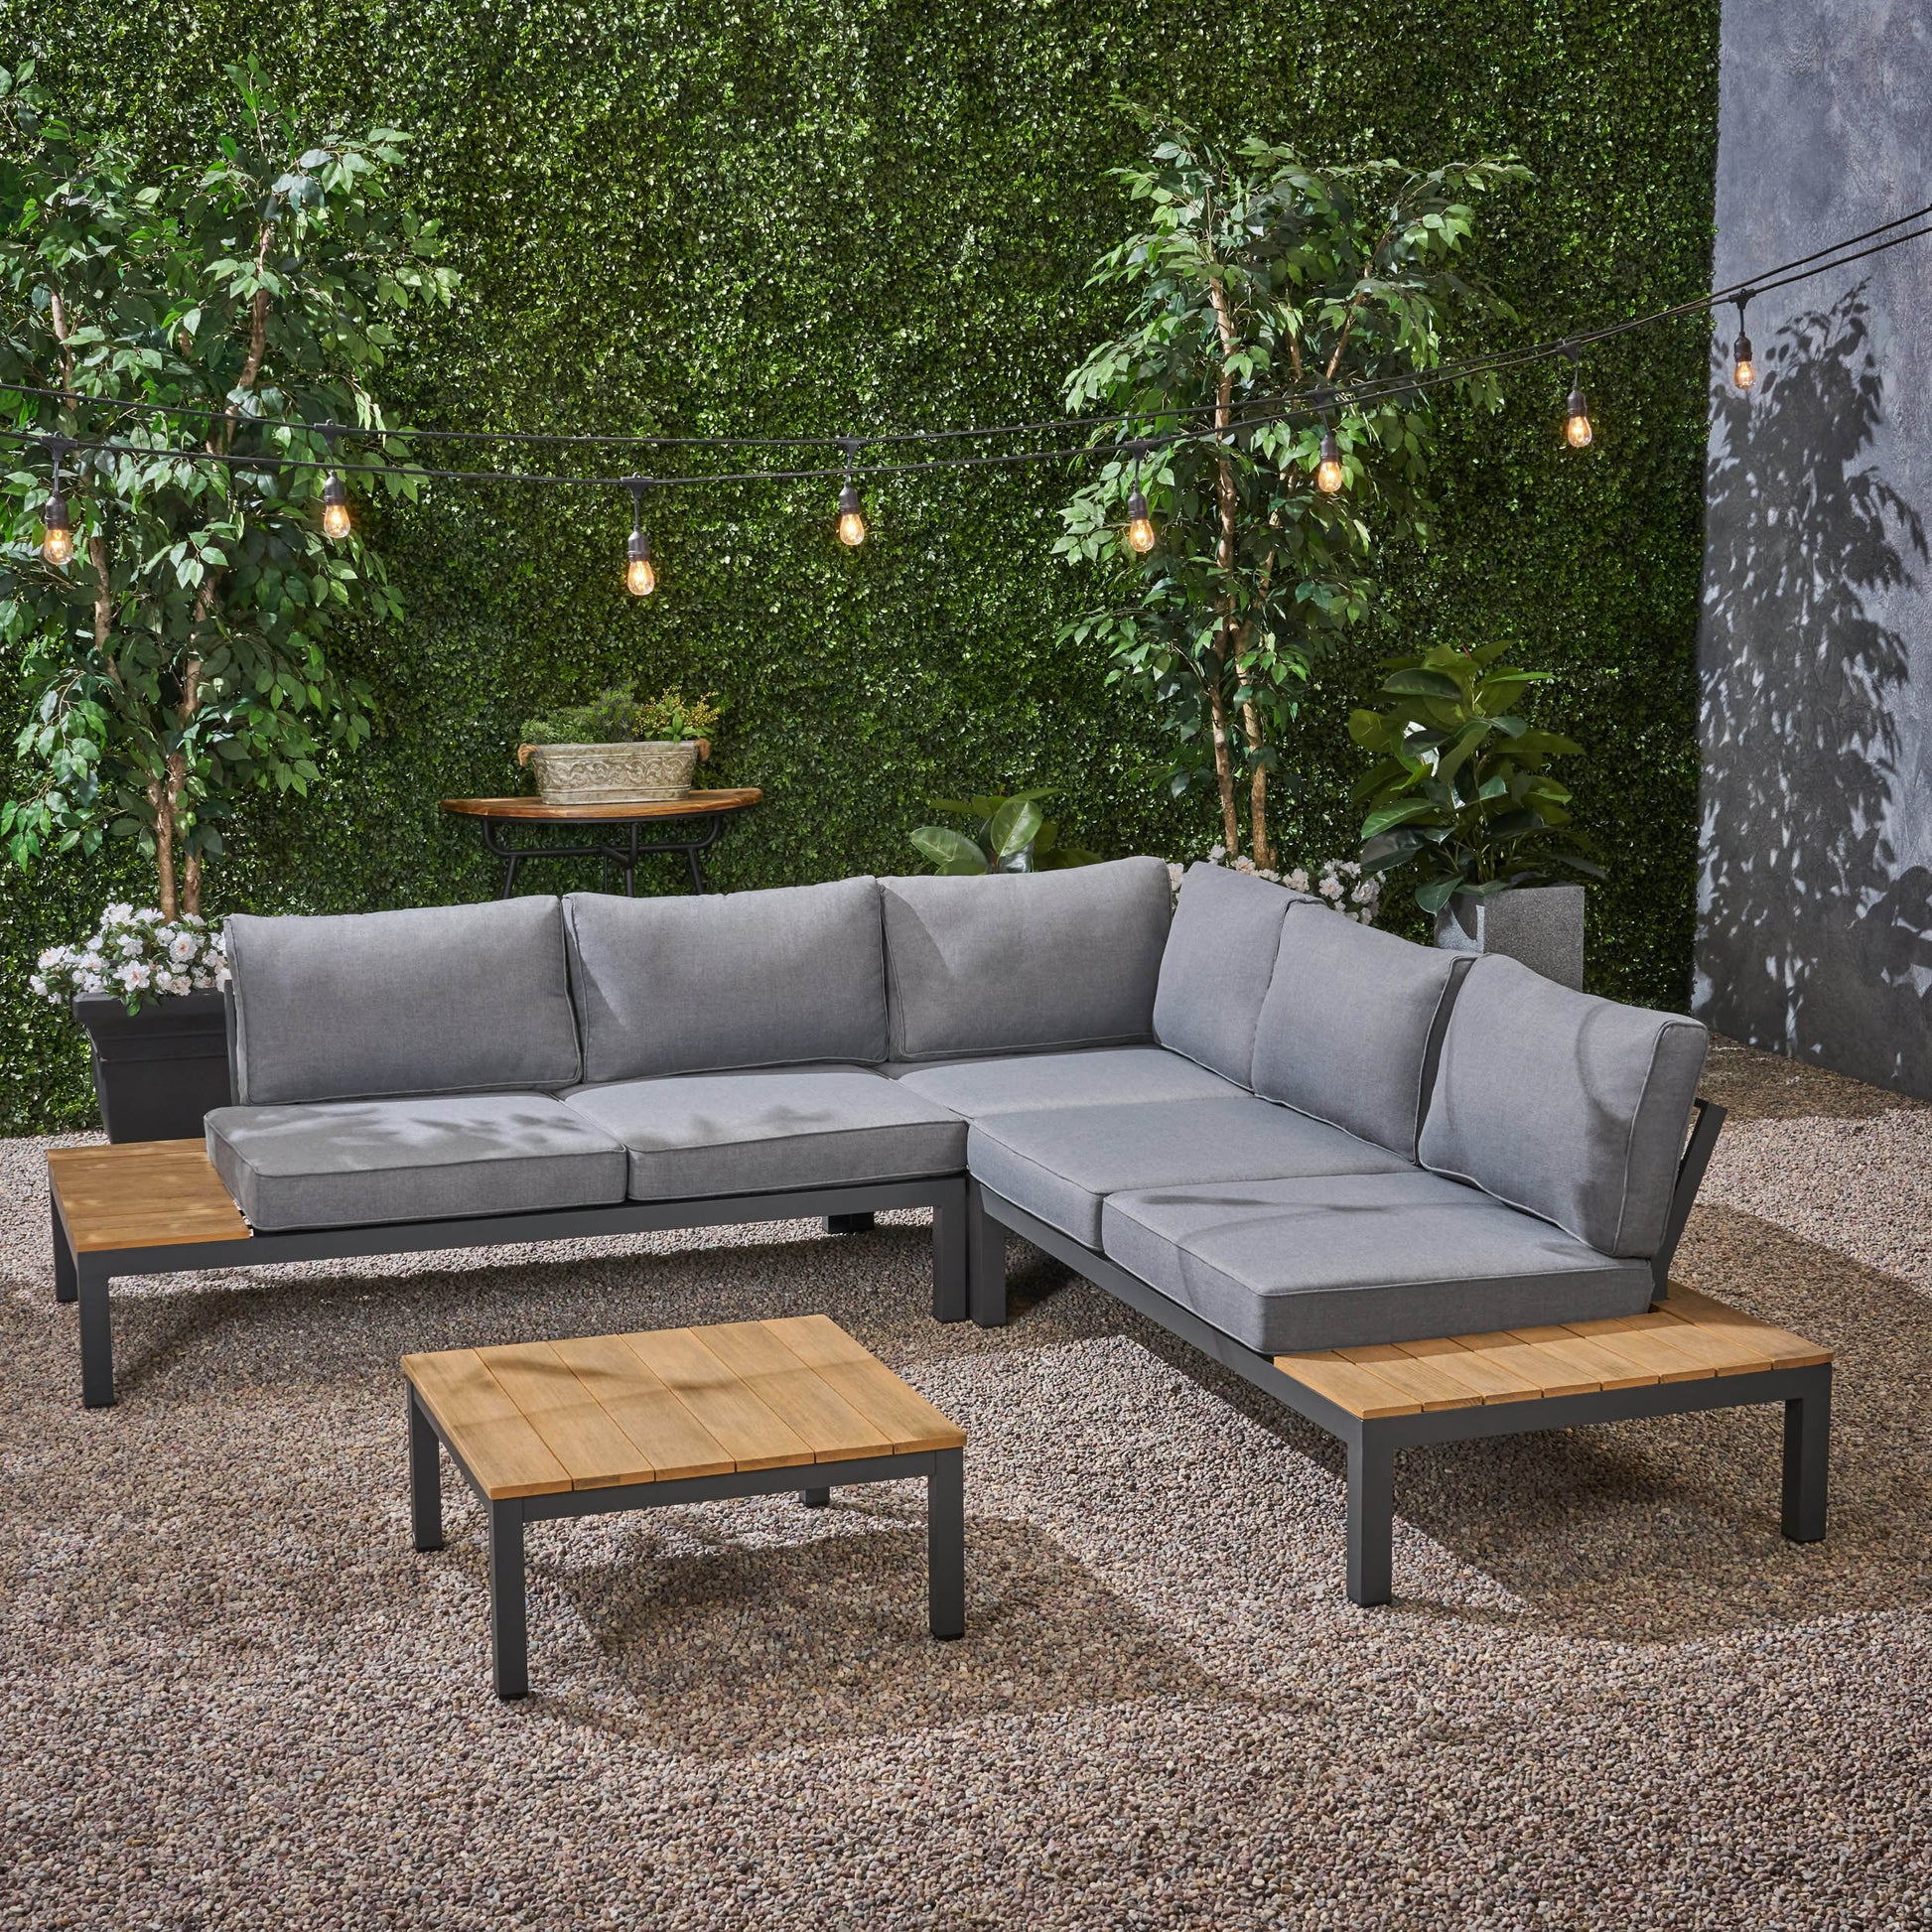 Blessen Aluminum and Wood V-Shaped Sofa Set with Cushions GDFStudio